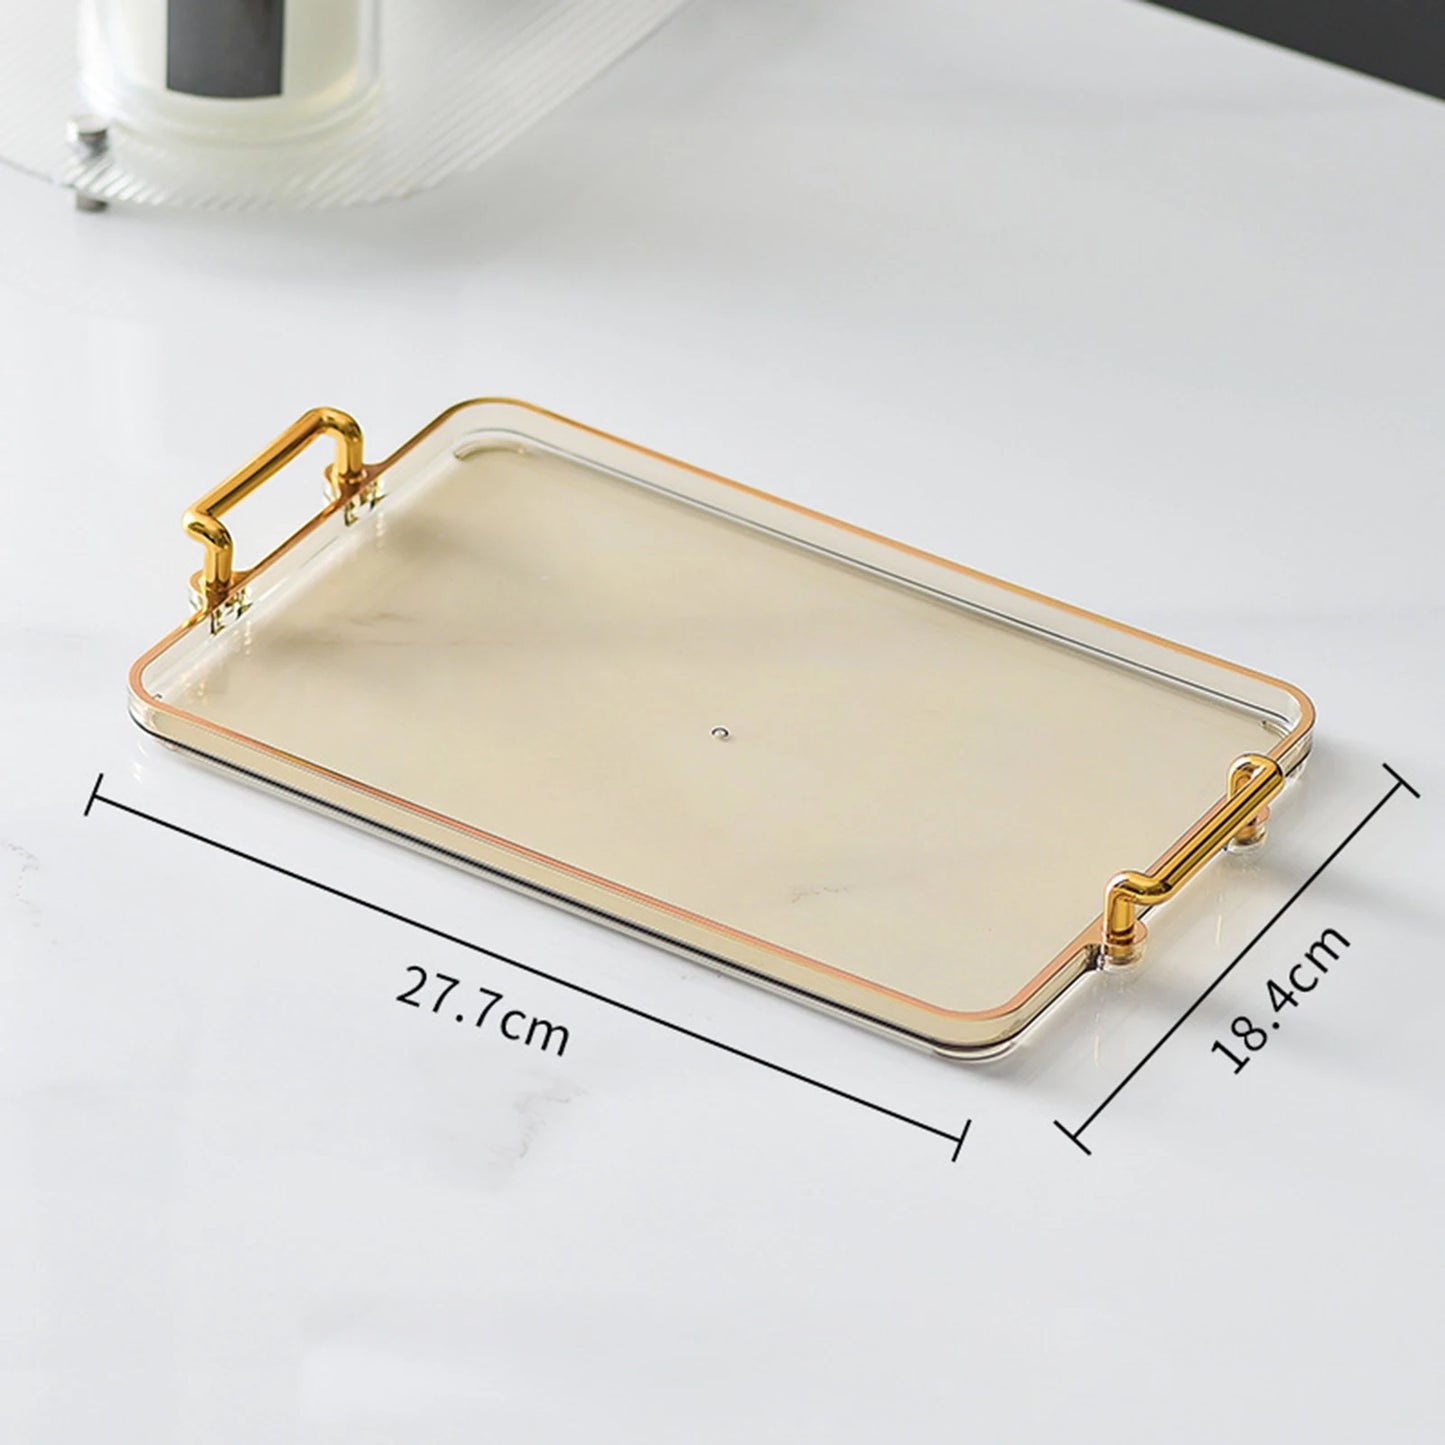 Farmhouse Serving Tray Countertop Organizer Food Cup Serving Tray Decorative Vanity Tray for Bedroom Shower Office Hotel Home